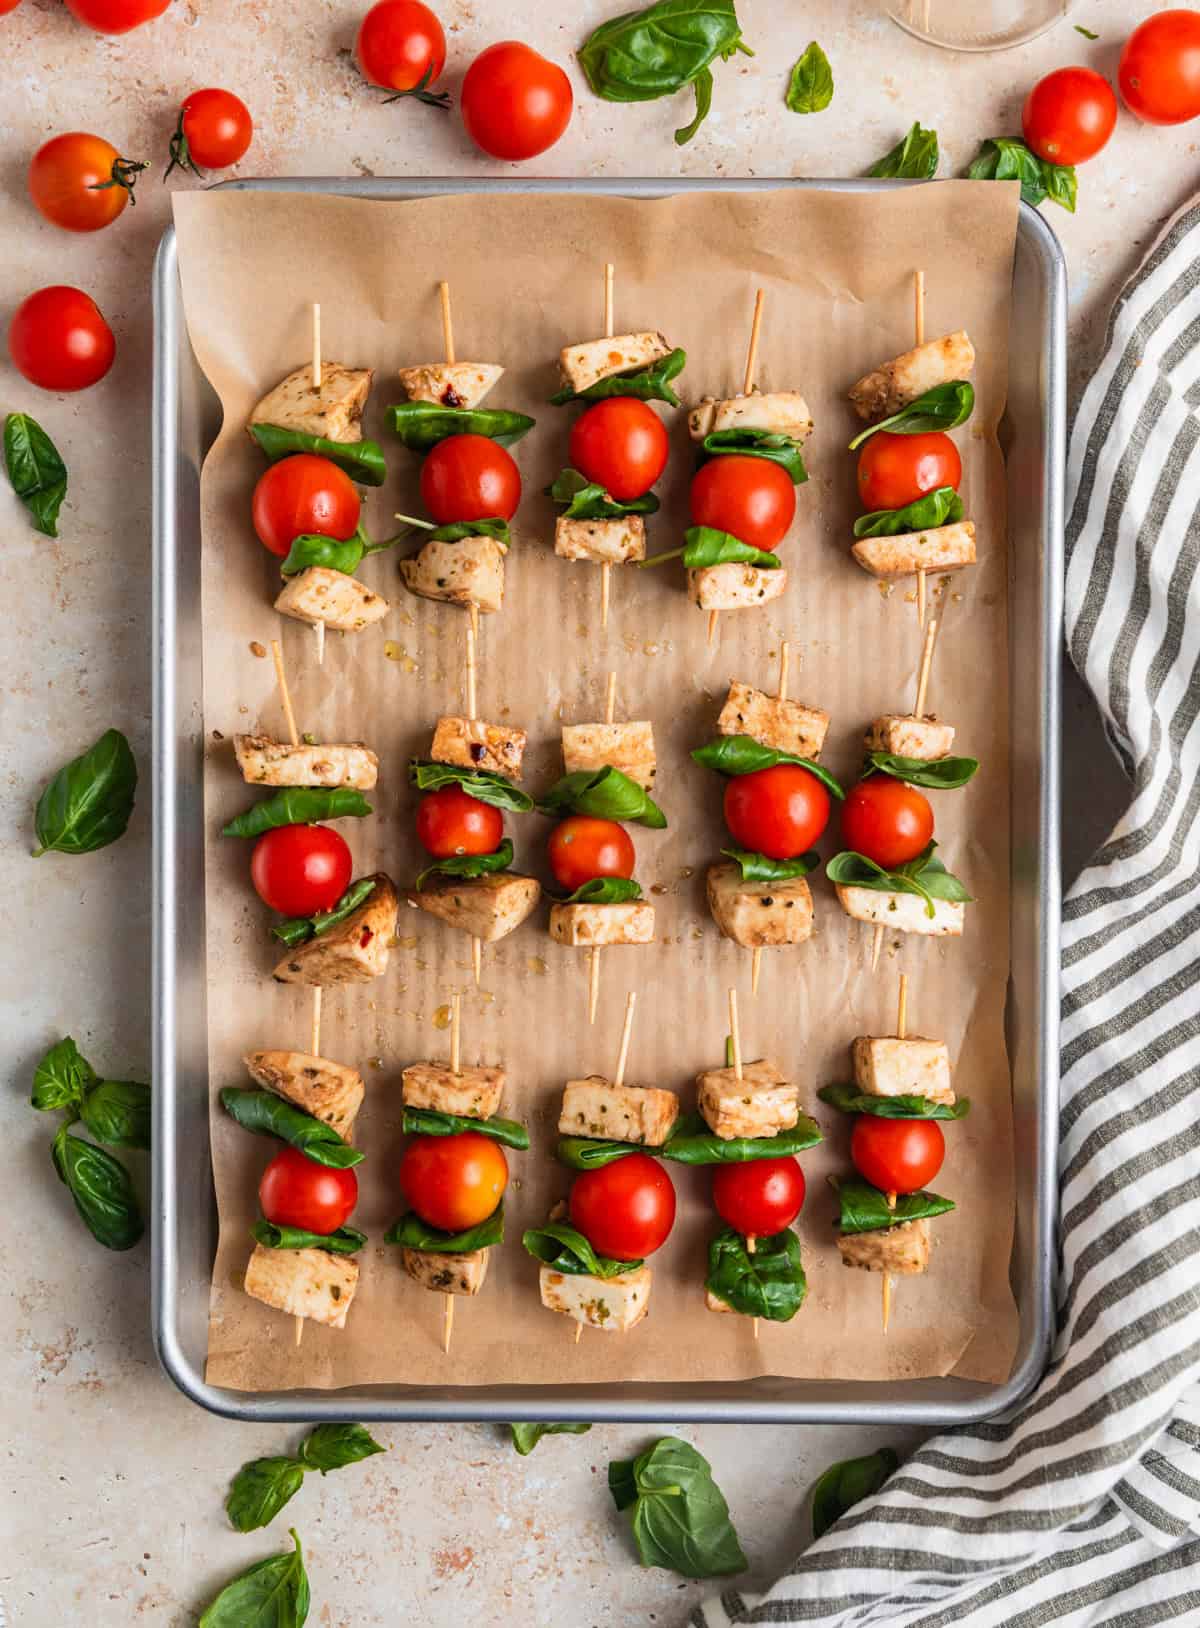 Skewers lined with grape tomatoes, basil leaves and marinated mozzarella on parchment lined cookie sheet.